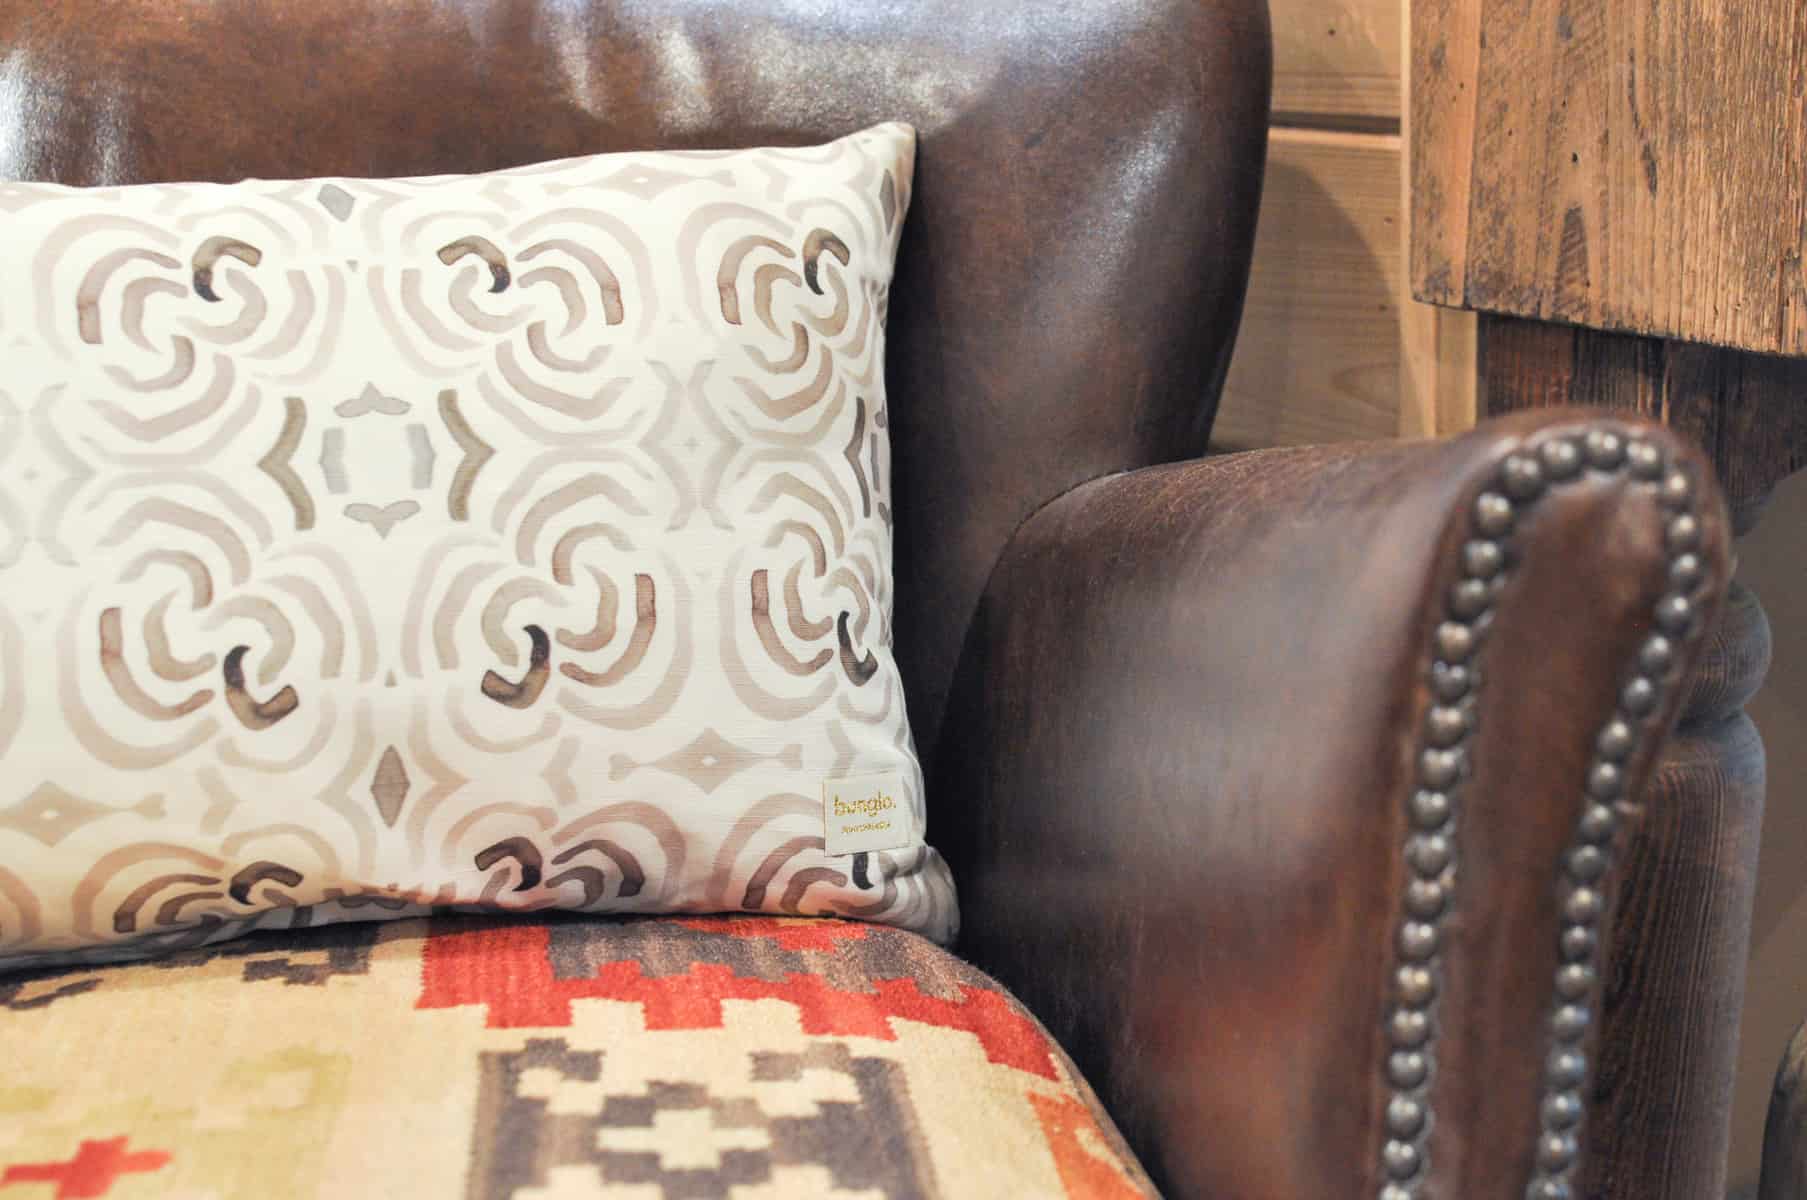 Home Furnishings: Leather chair with reversible cushion and bunglo accent pillow.